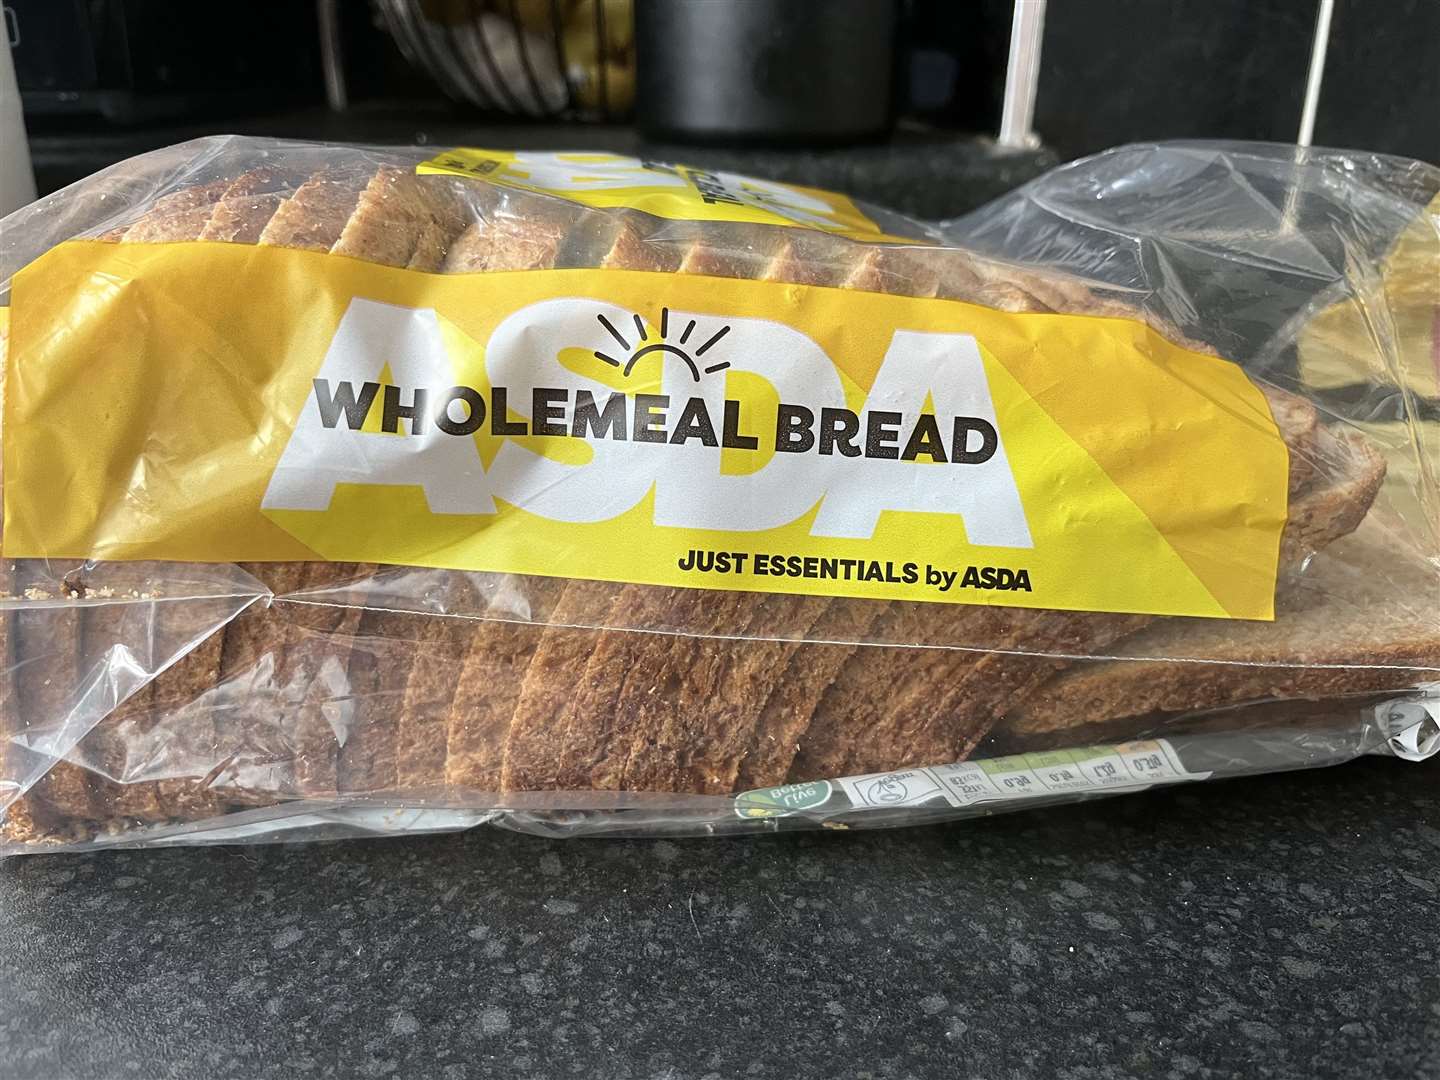 The loaf of bread cost 39p, and despite how surprisingly heavy it was, it tasted okay